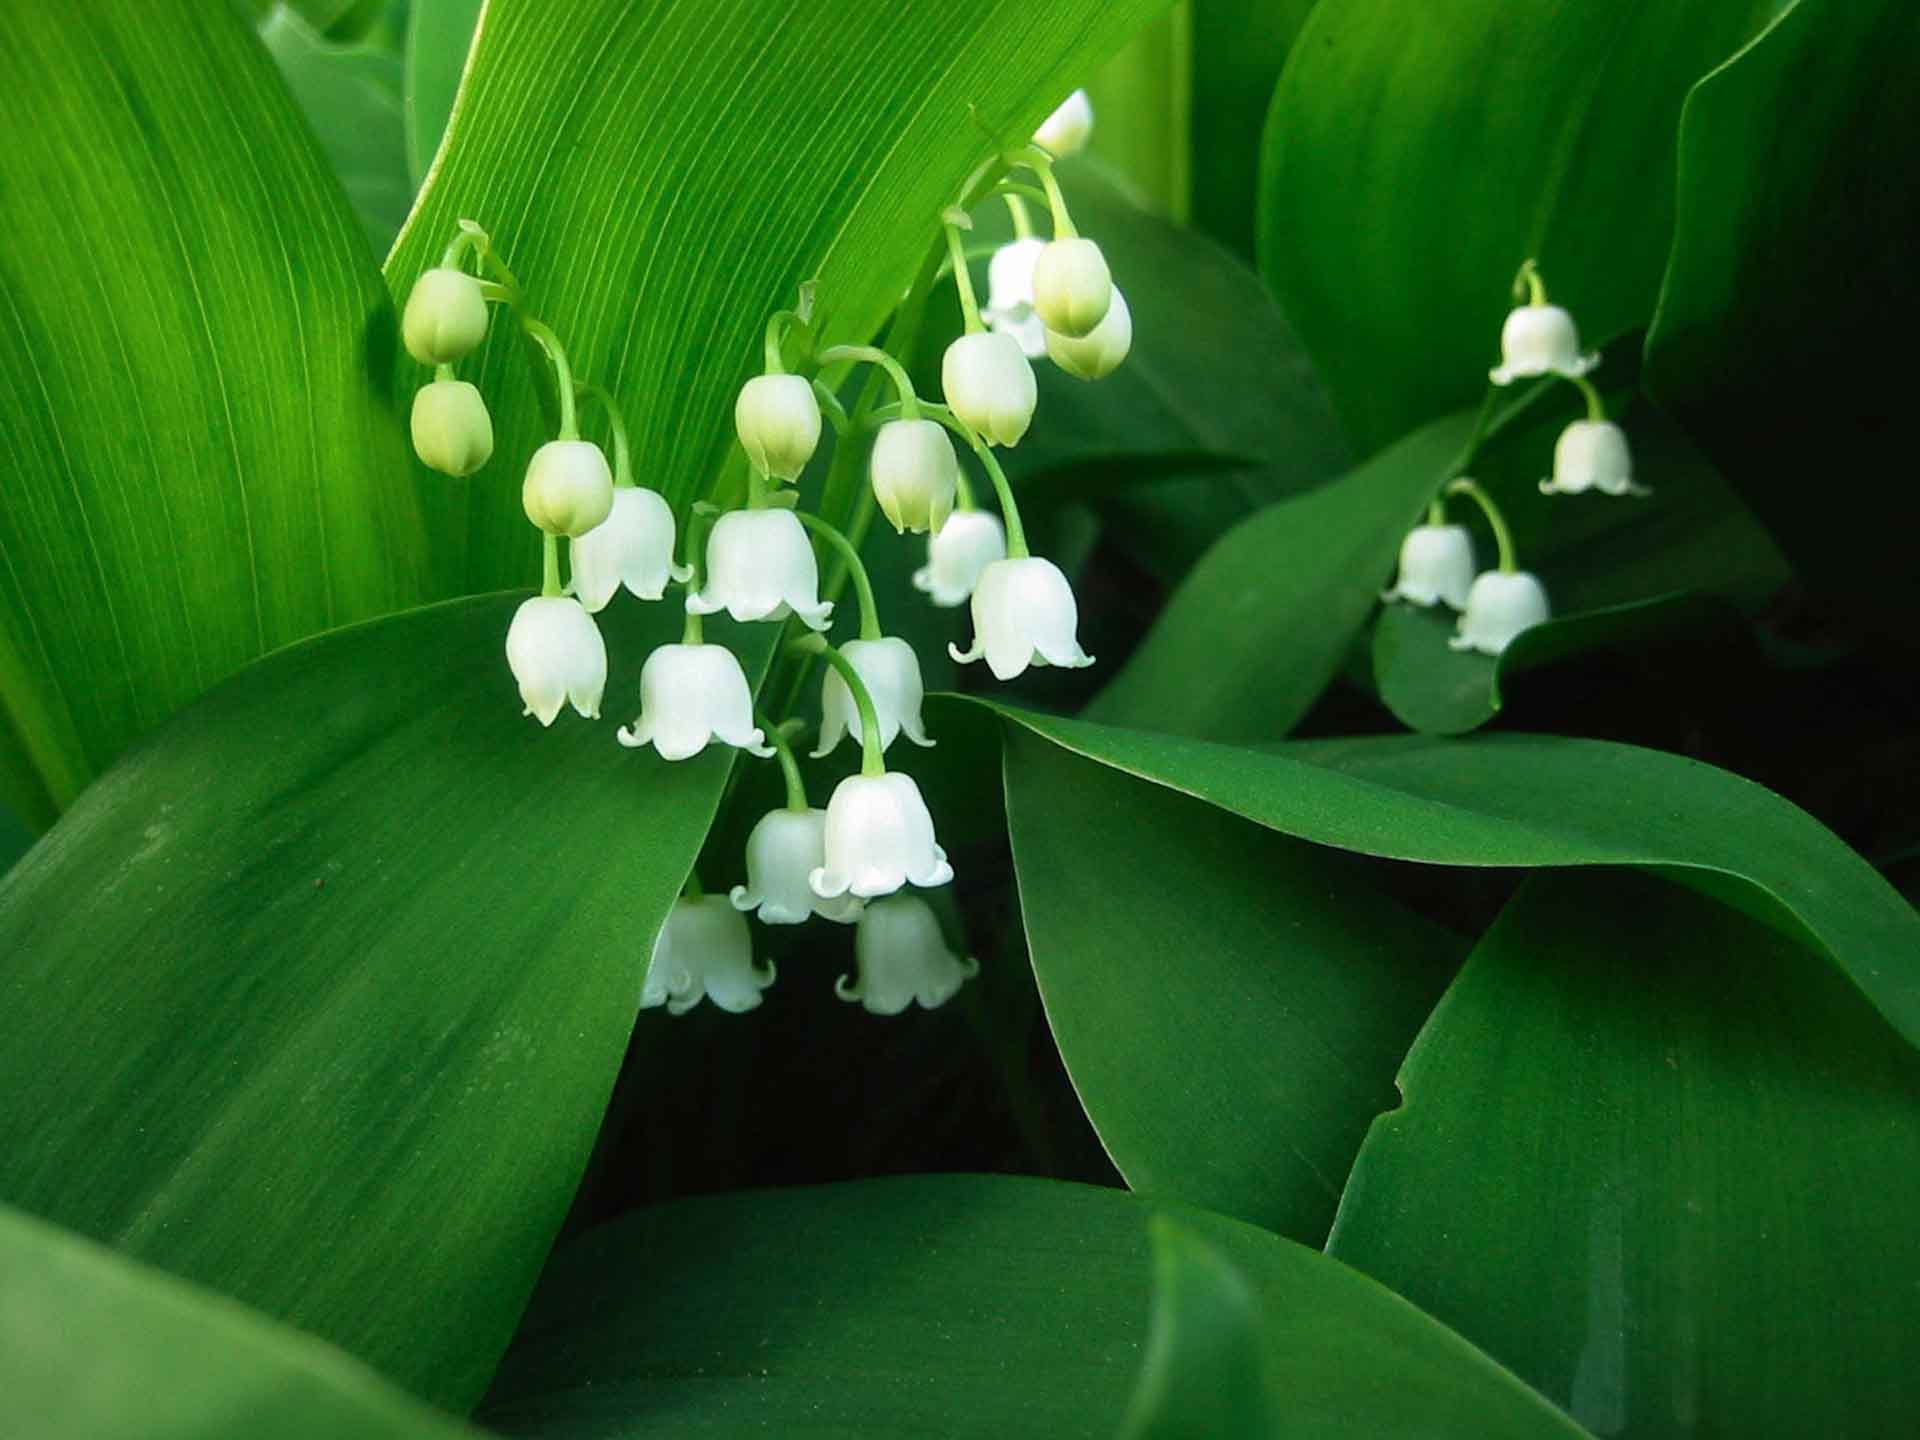 Lily Of The Valley Wallpaper